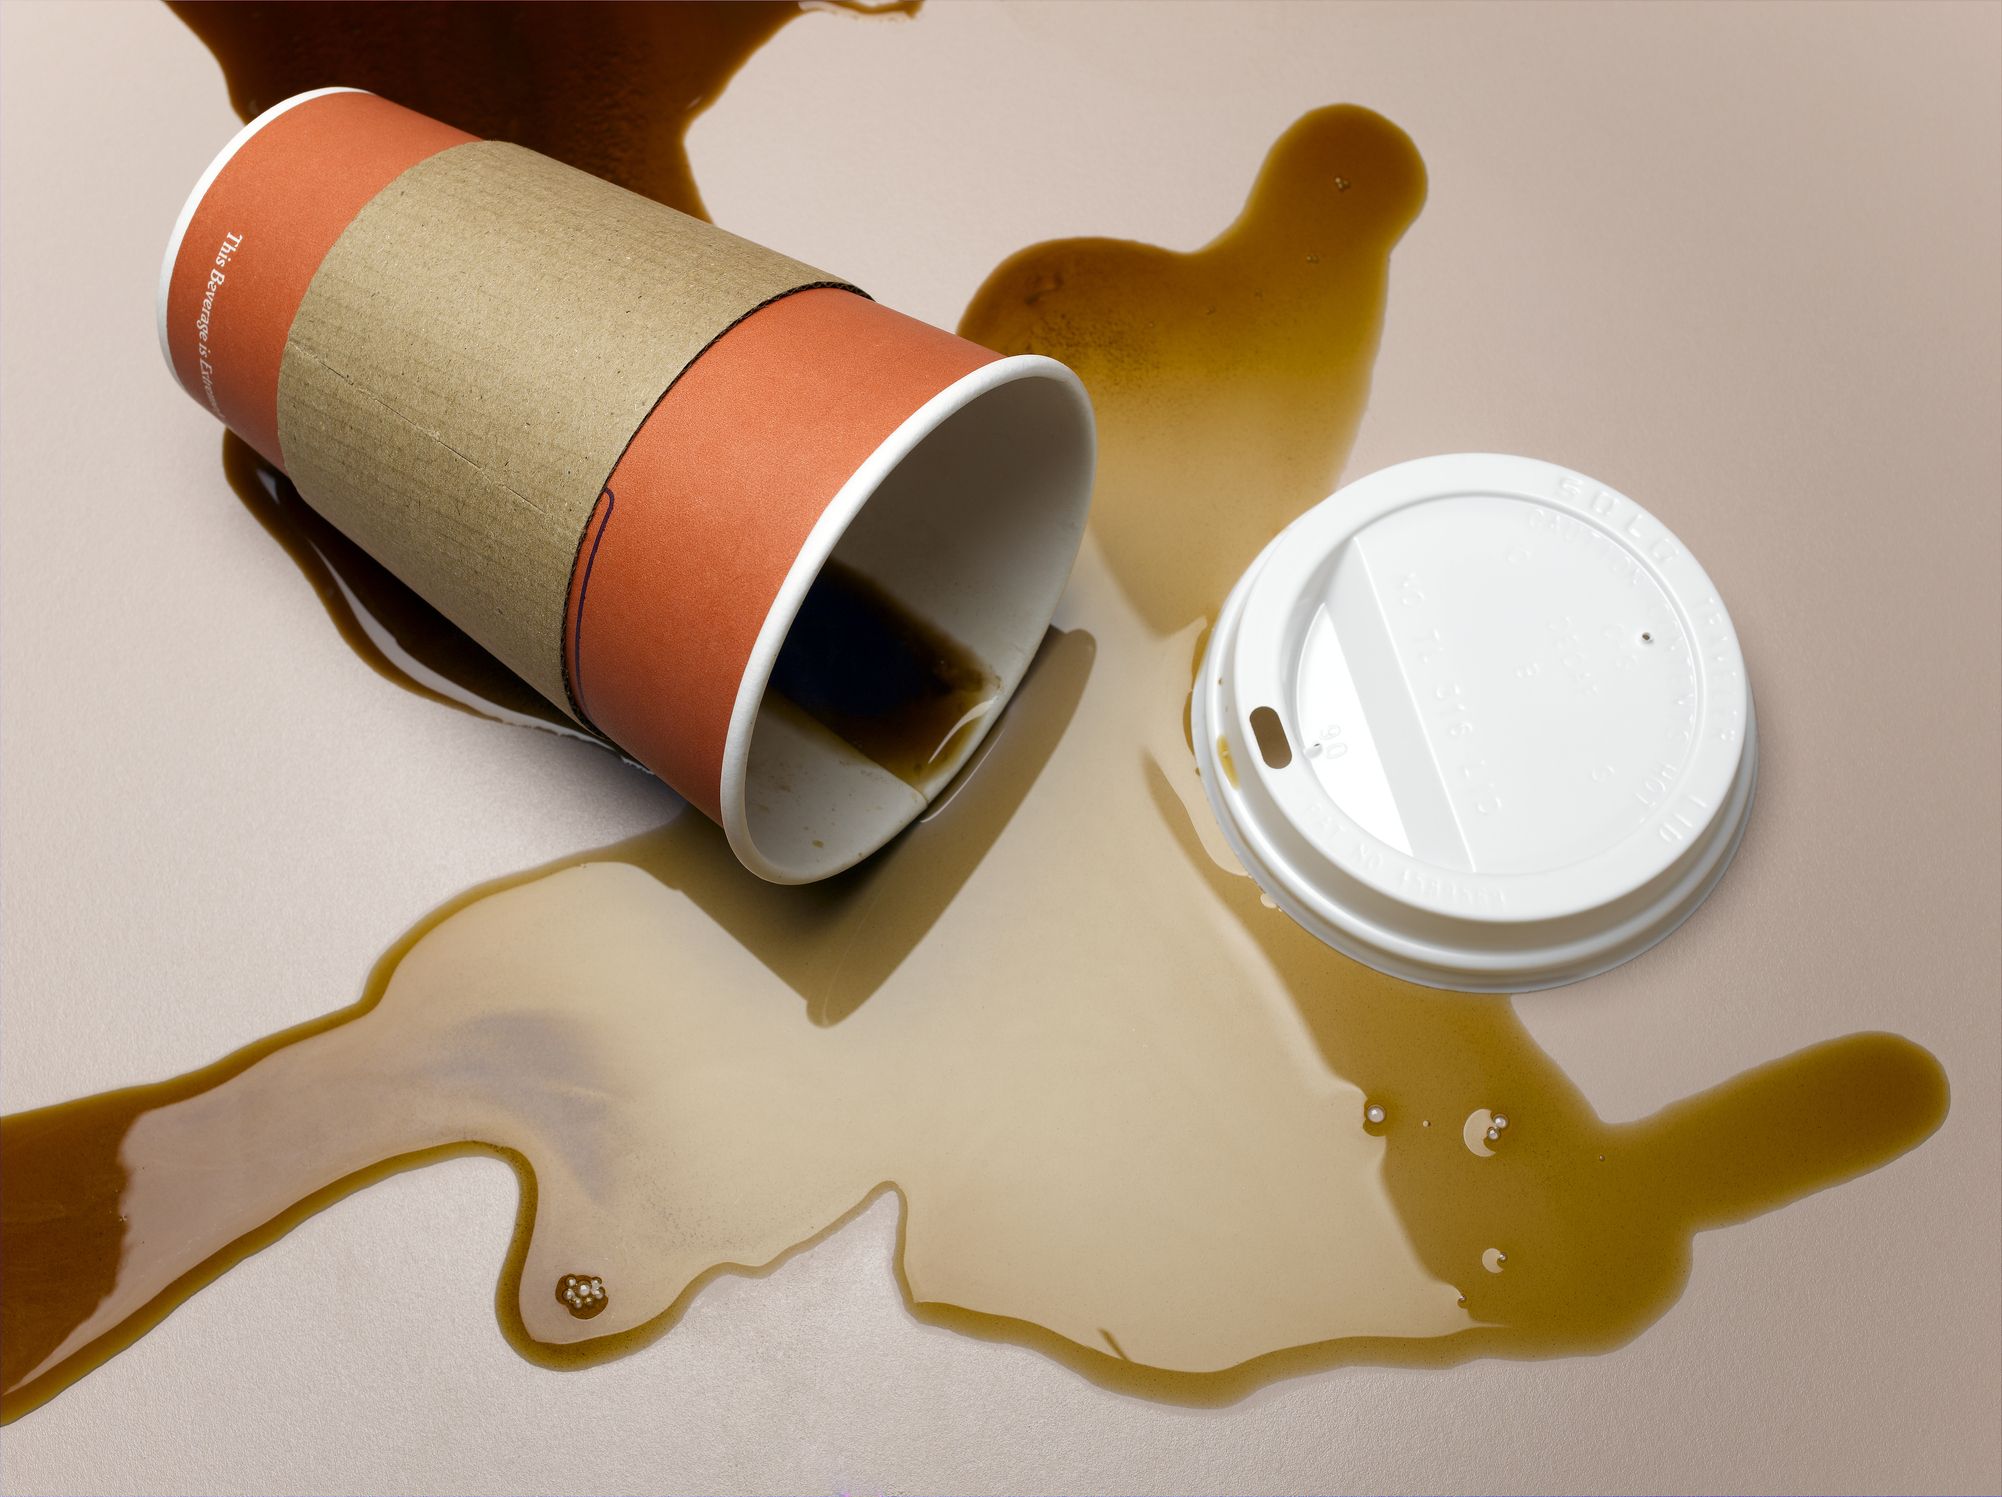 vending-cup-on-side-spilling-coffee-onto-surface-royalty-free-image-1651507034.jpg